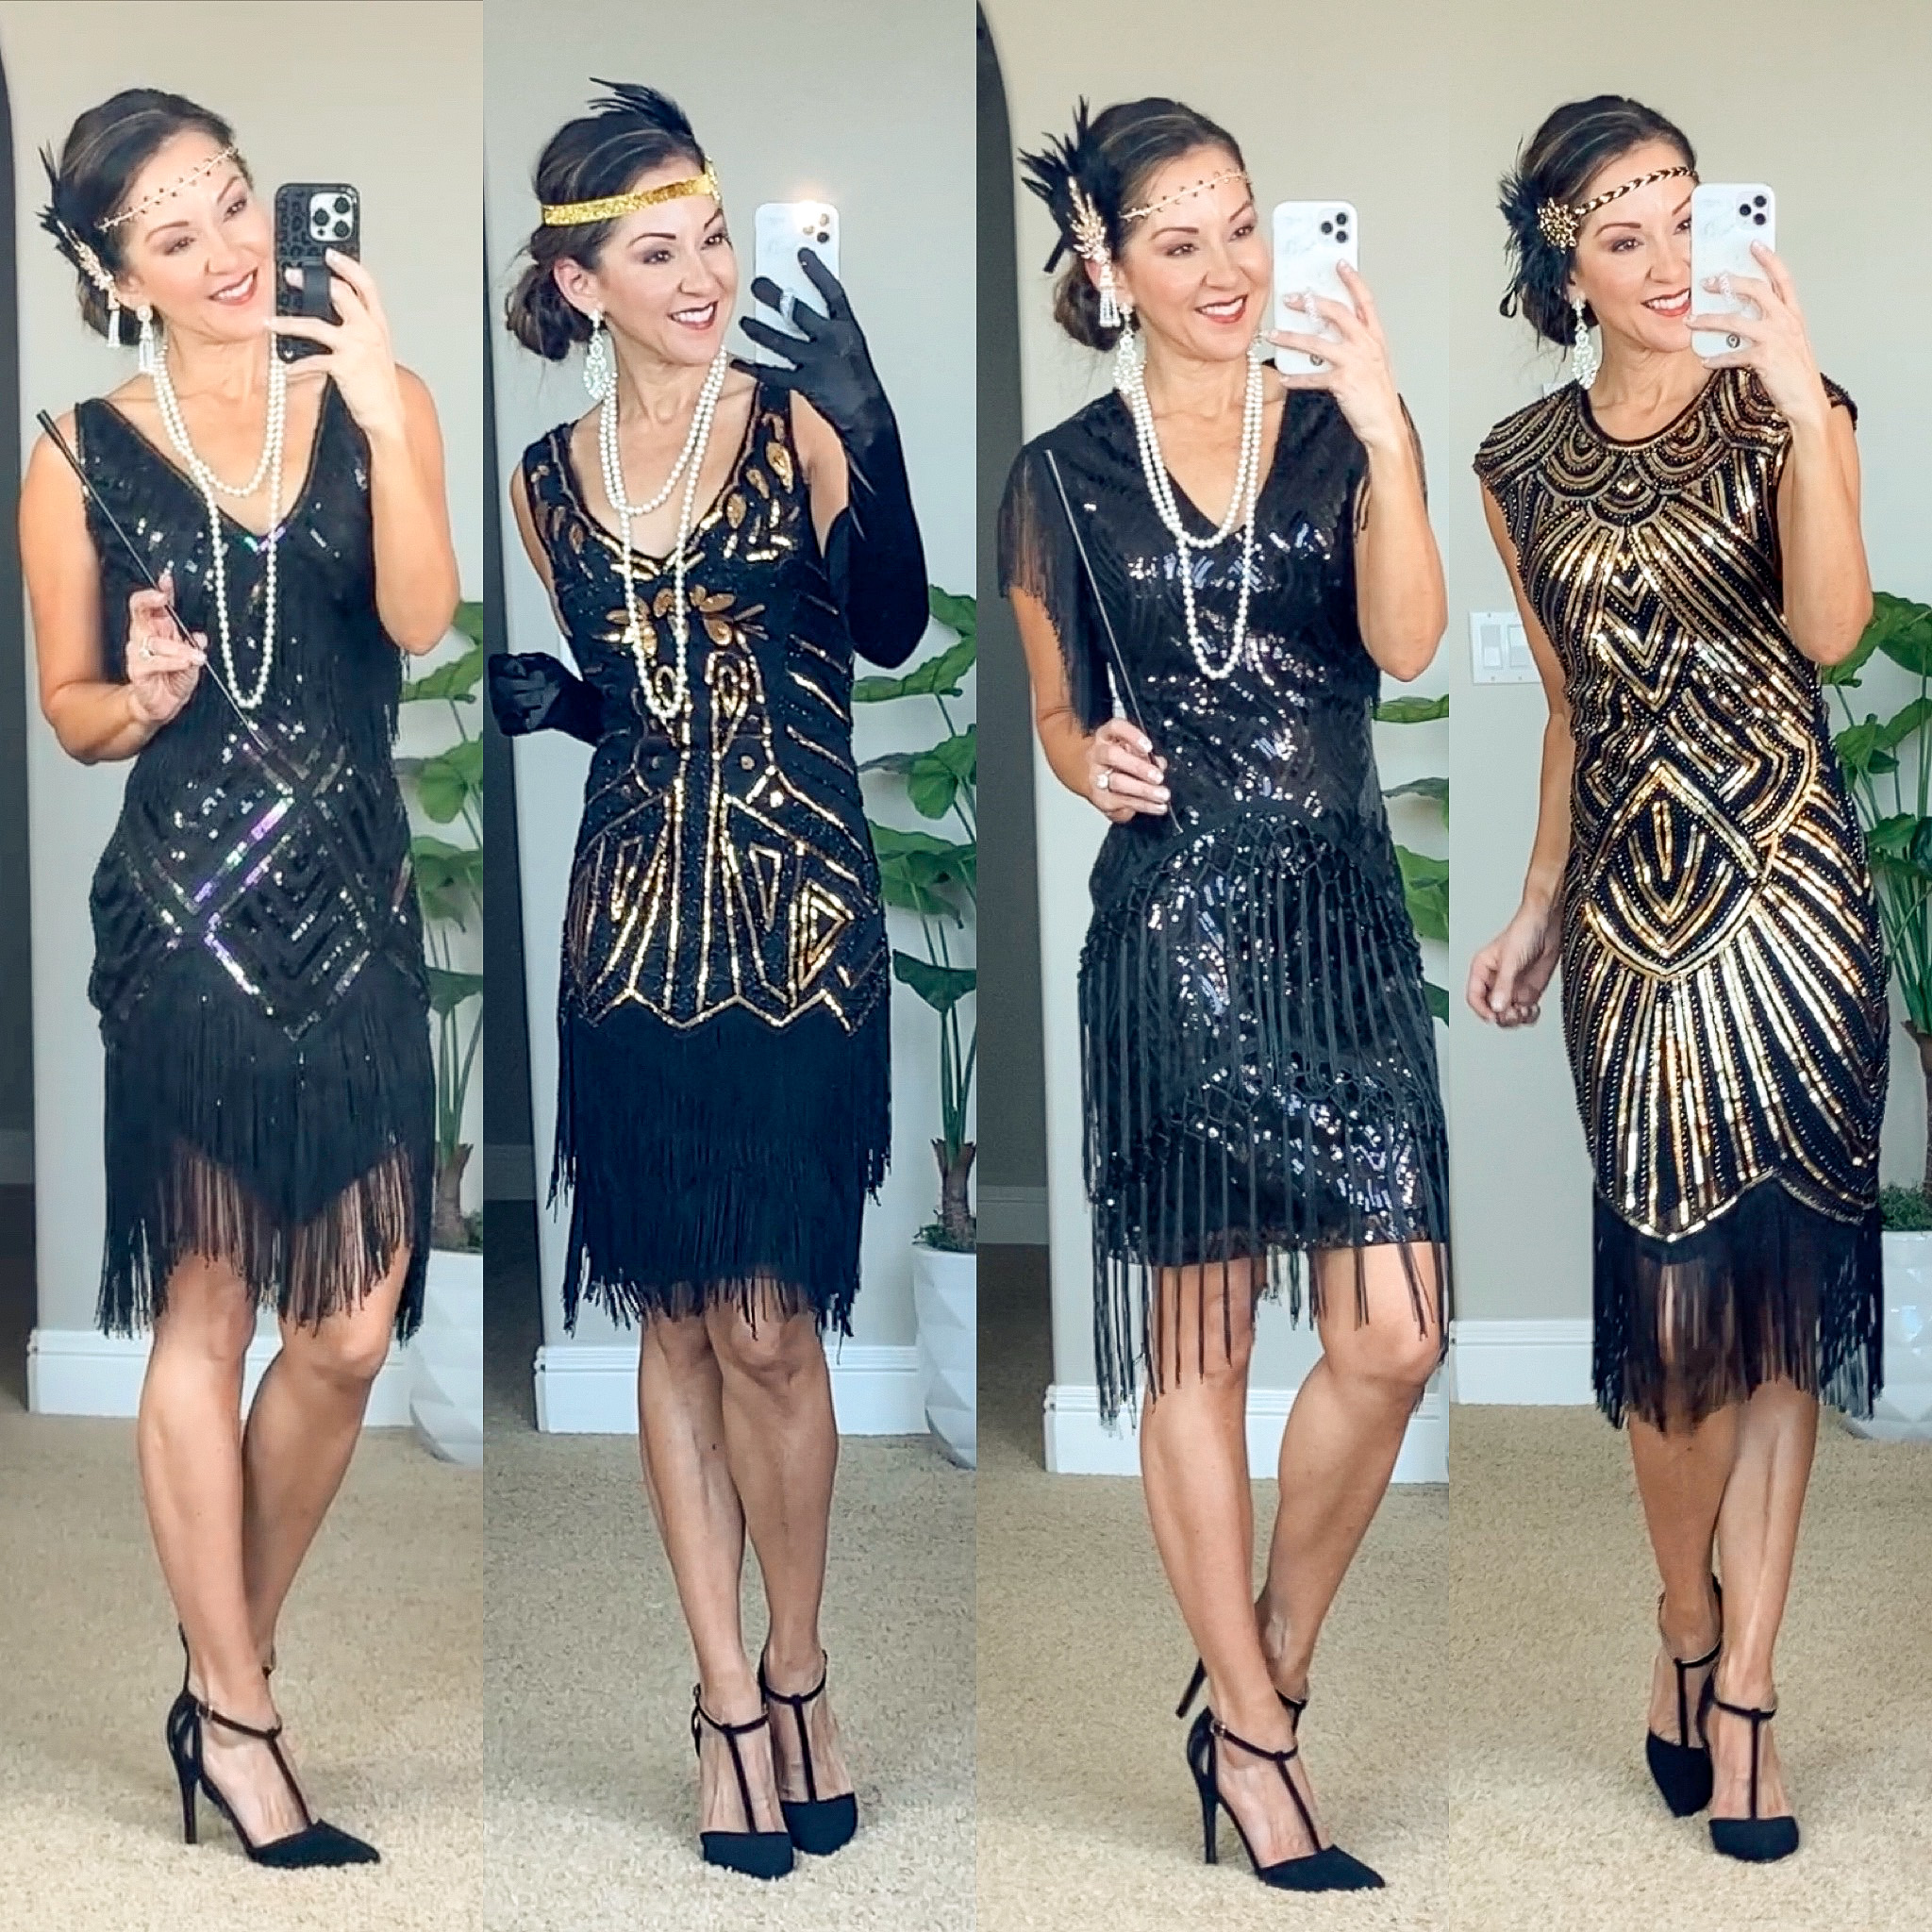 roaring 20's, great gatsby themed fashion, flapper dresses, black fringe dresses, jewelry accessories